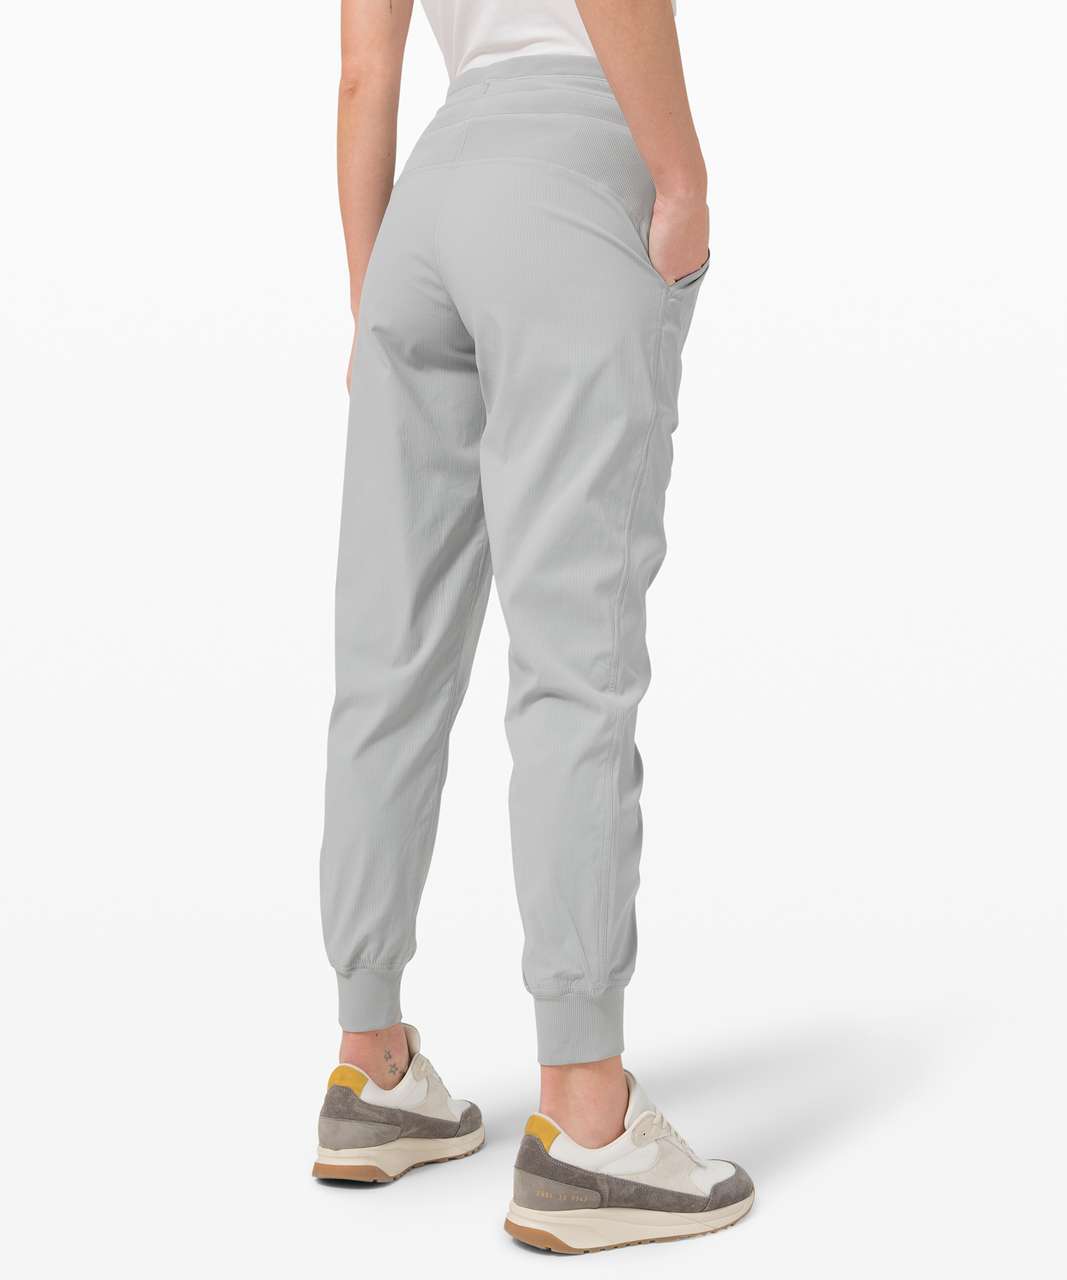 Lululemon Dance Studio Cropped 25 Jogger Pants Womens Size 6 Silver  Mid-Rise - $50 - From Paula